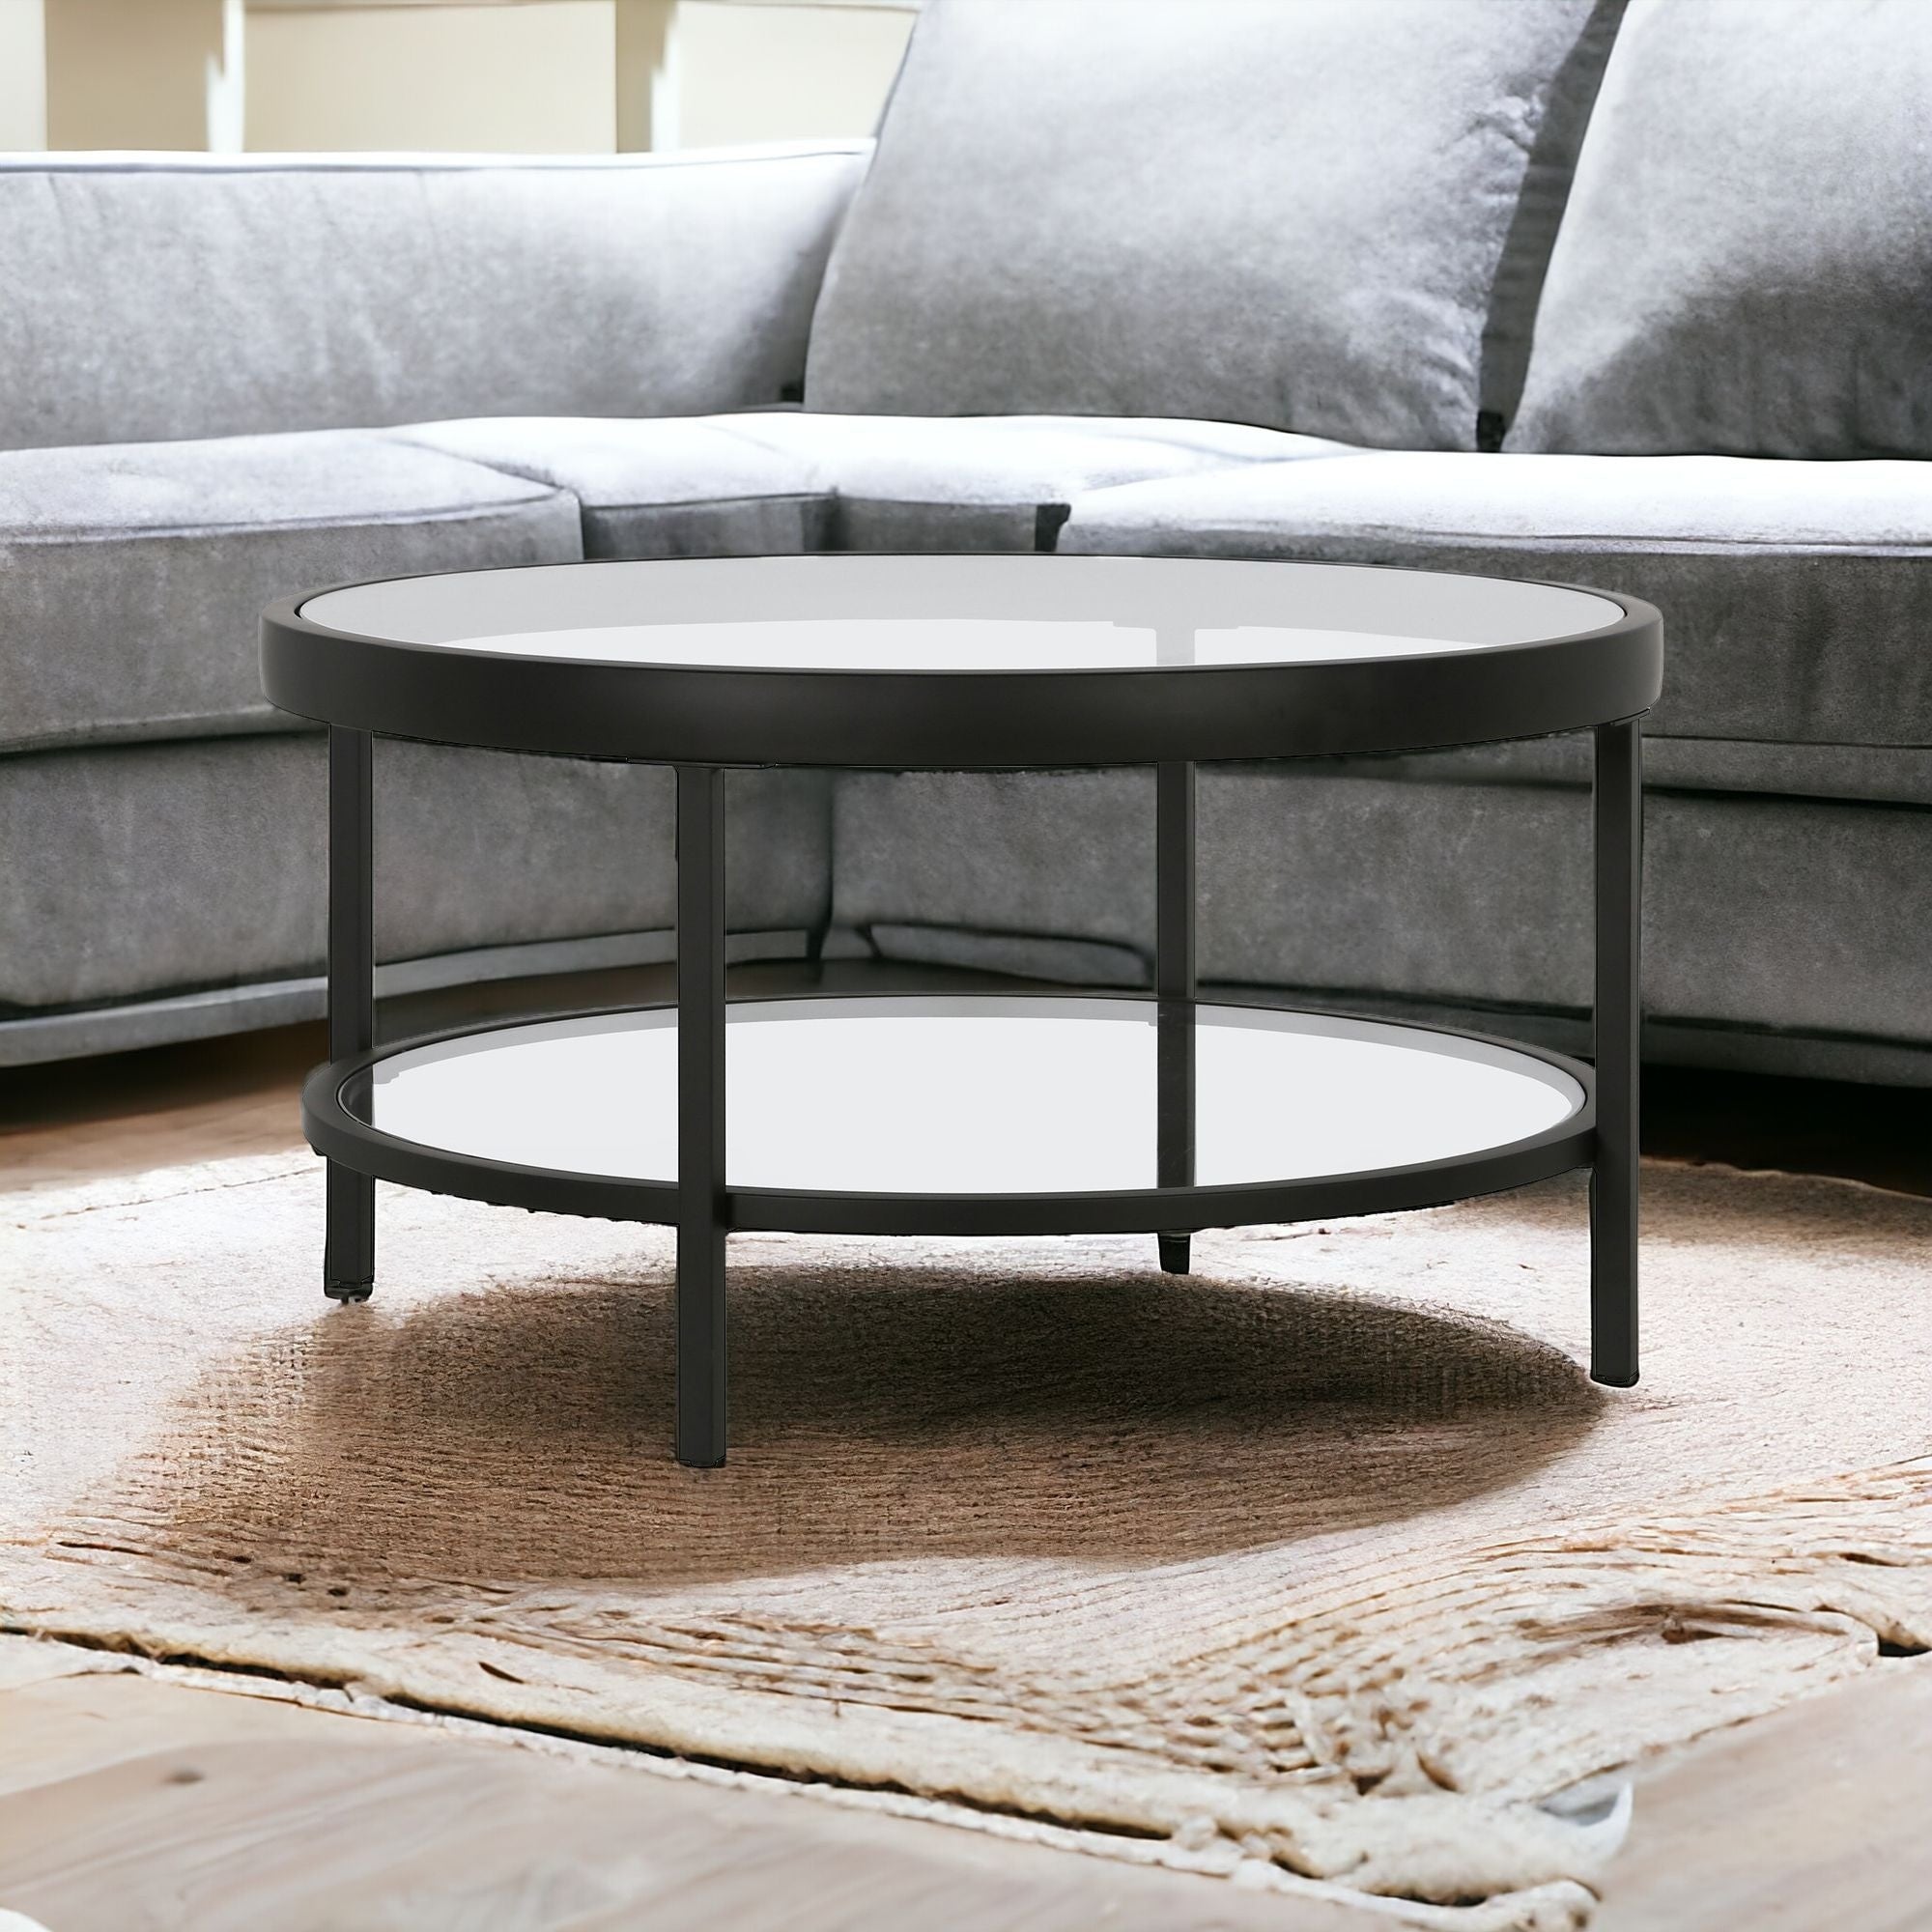 32" Black Glass And Steel Round Coffee Table With Shelf